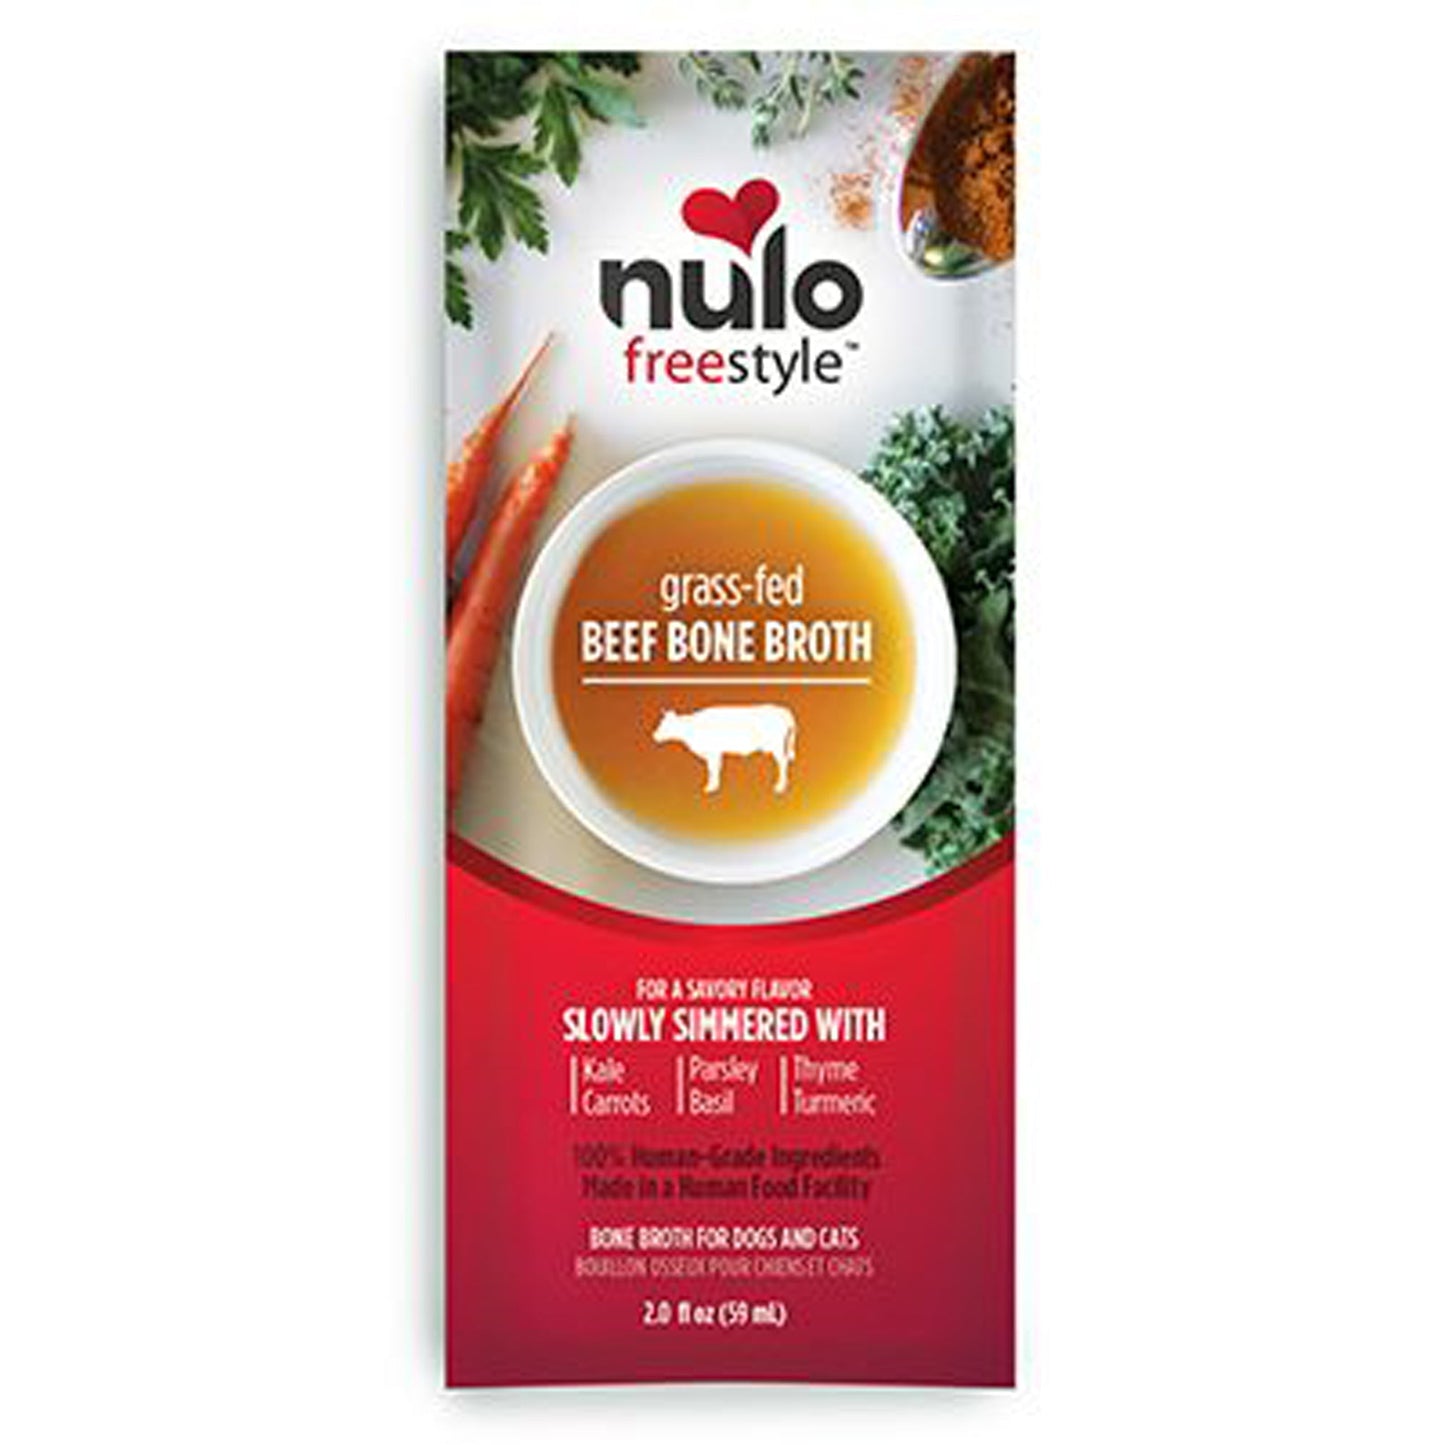 Nulo Freestyle Dog Food Topper Grass-Fed Beef Bone Broth 2oz. (Case of 24)